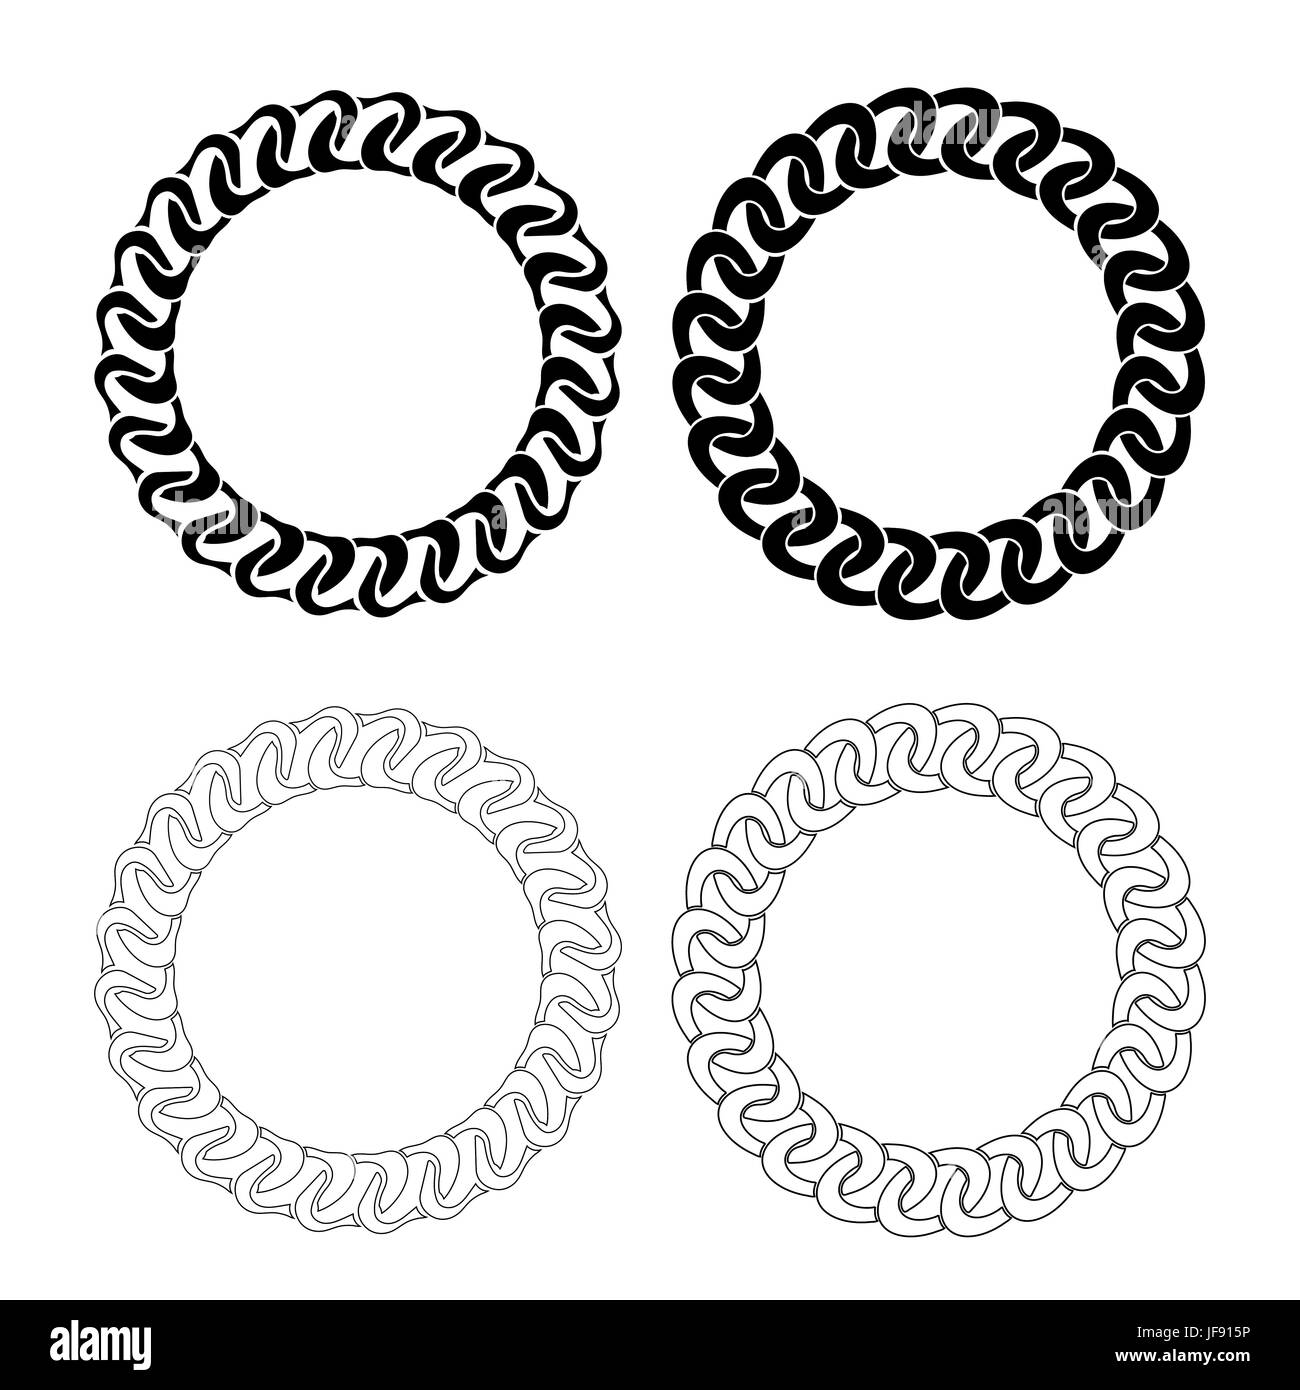 Circle Decorative Chain  Frames Isolated on White Background Stock Vector